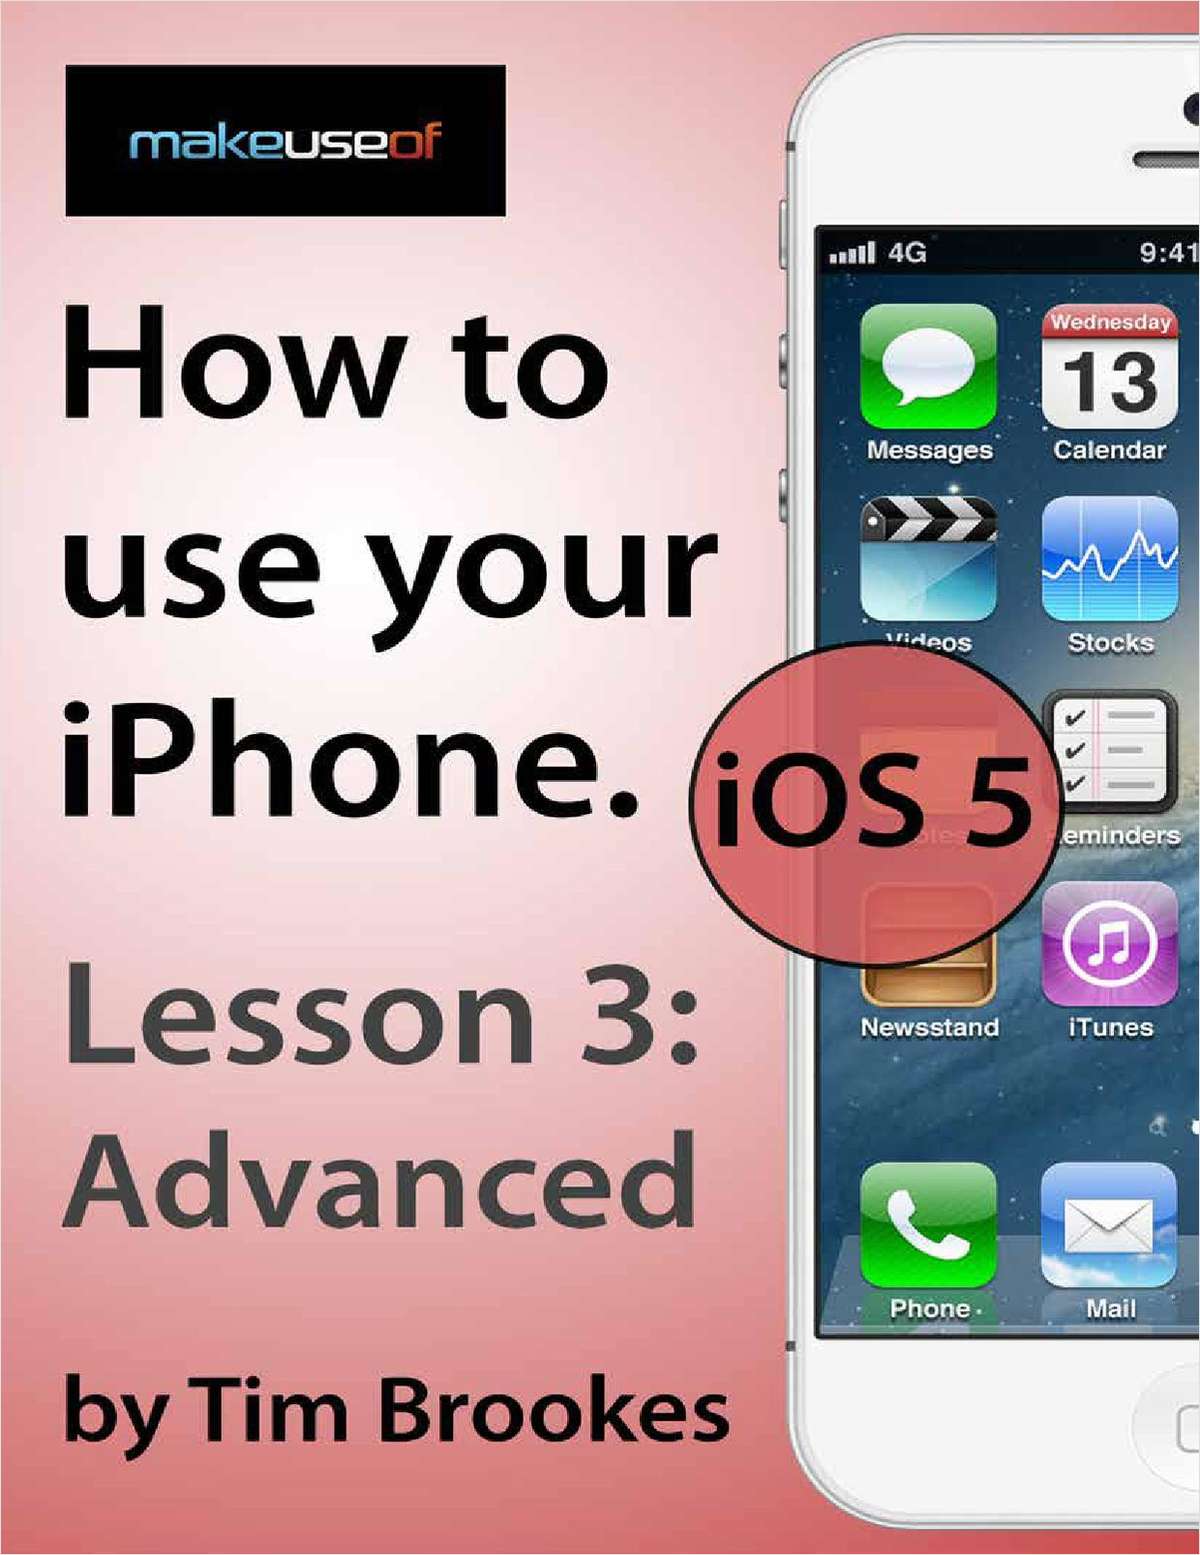 How To Use Your iPhone iOS5: Lesson 3 Advanced